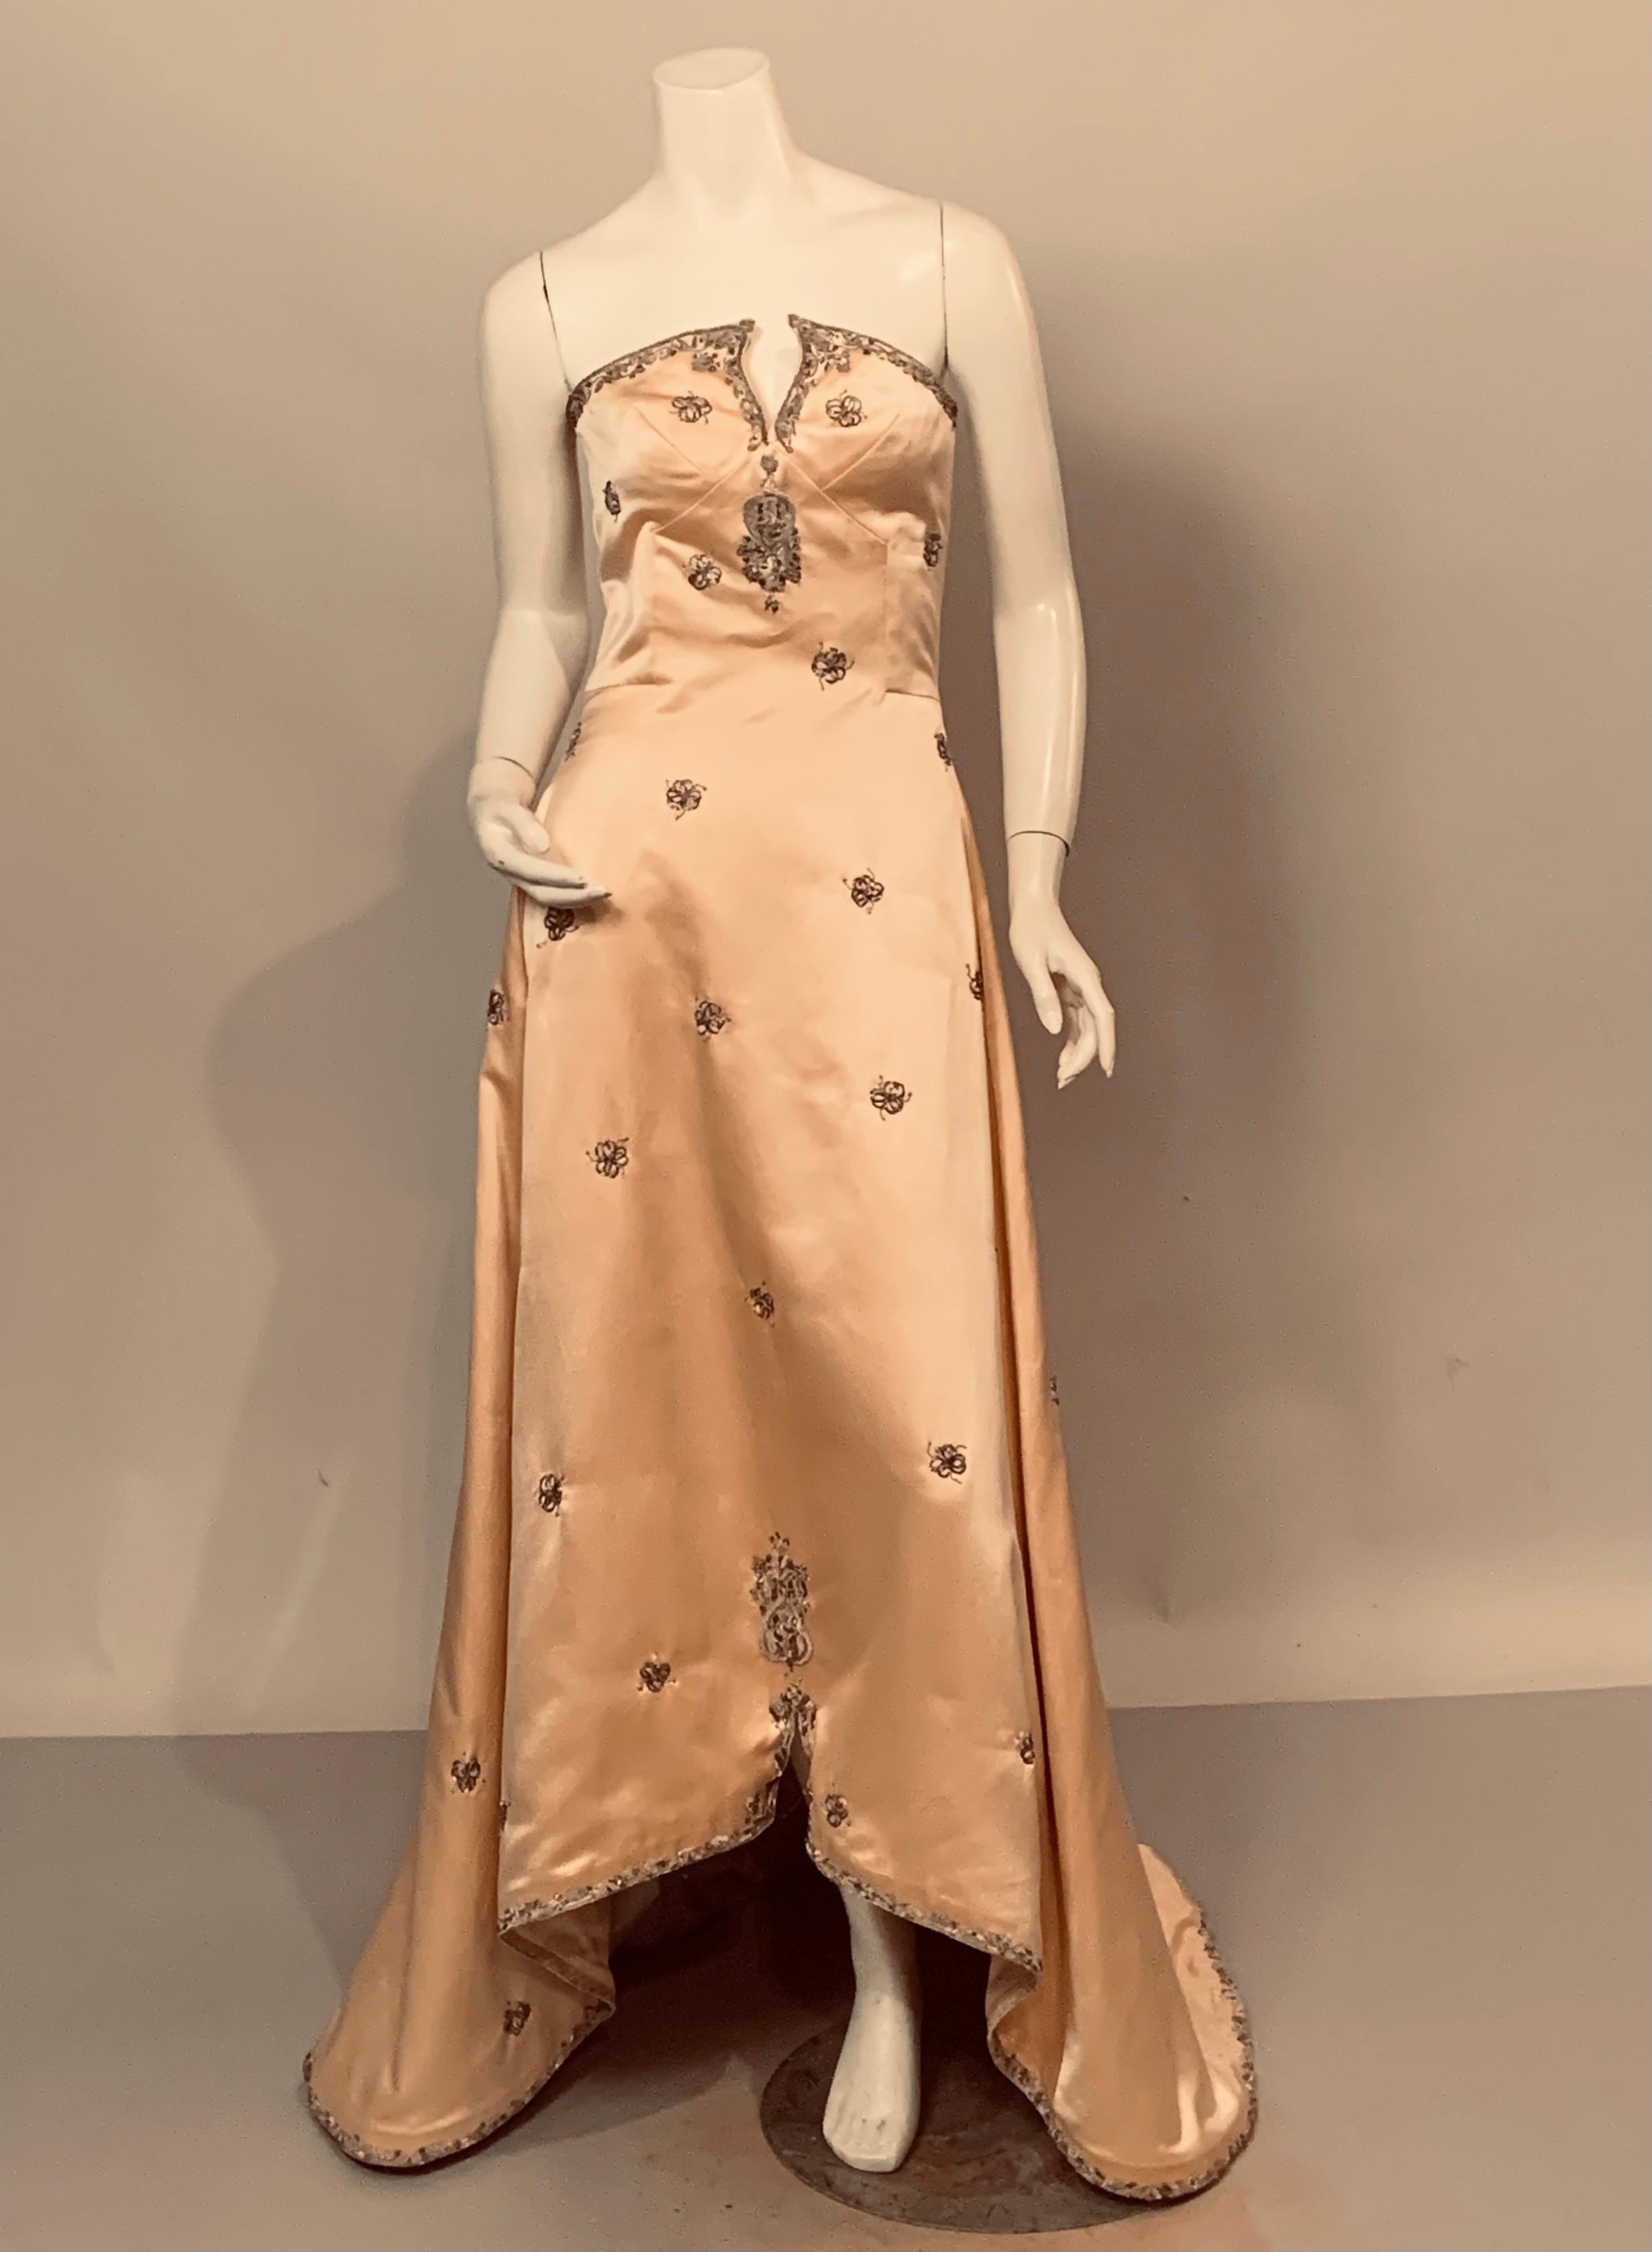 This is an absolutely beautiful strapless shell pink silk satin evening gown with a train and silver metallic hand embroidery. This piece does not have the tag but I do believe the embroidery is by Lesage, Maggie used it in many of her pieces and